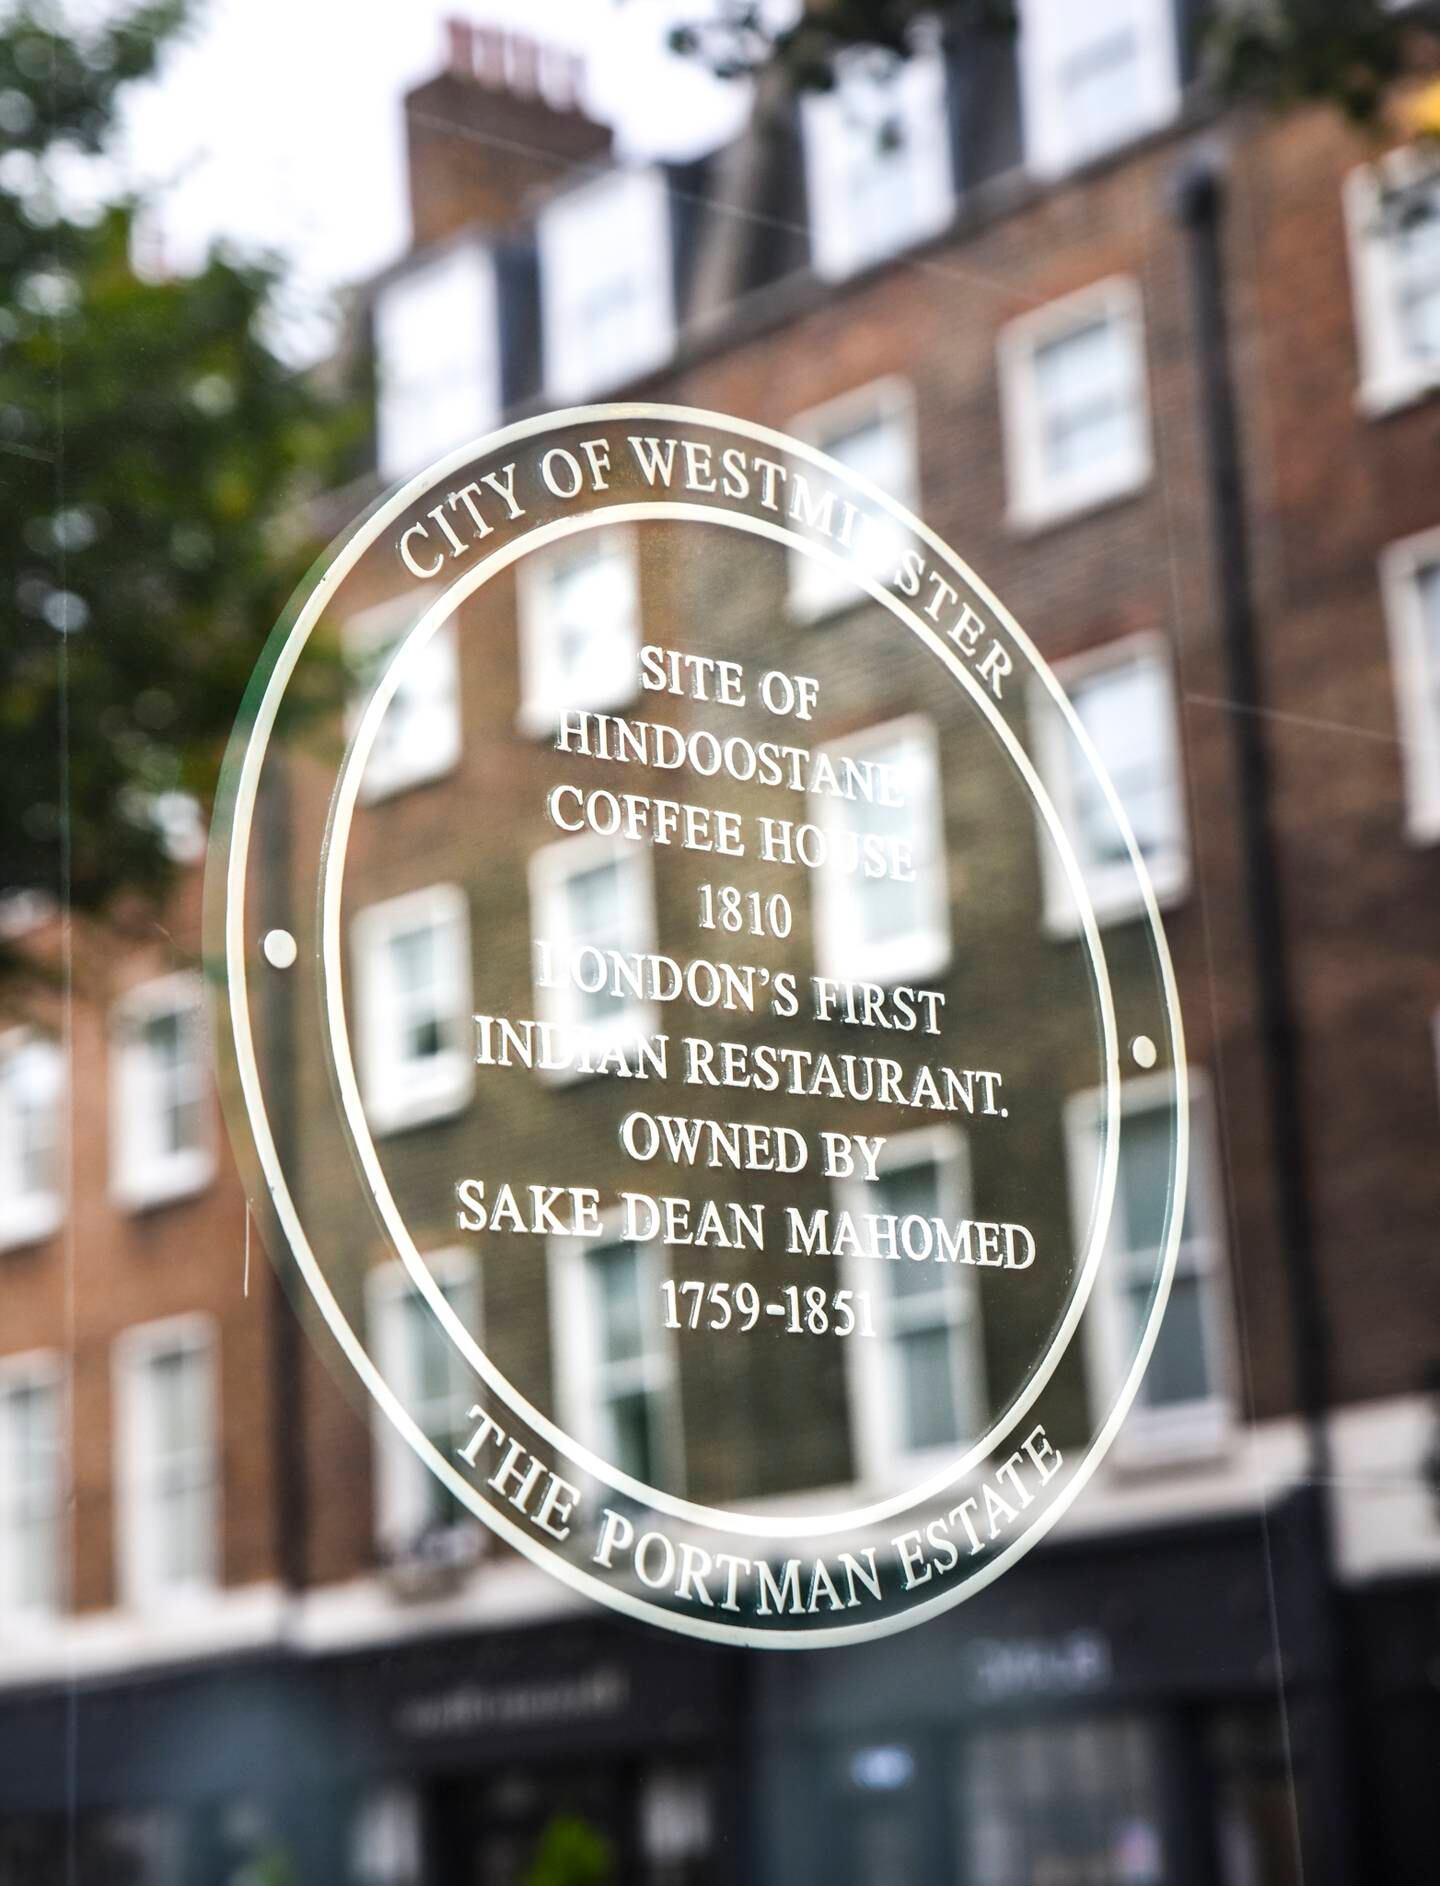 A plaque marks the site of London's first Indian restaurant, opened by Mahomed. Photo: Ronan O'Connell